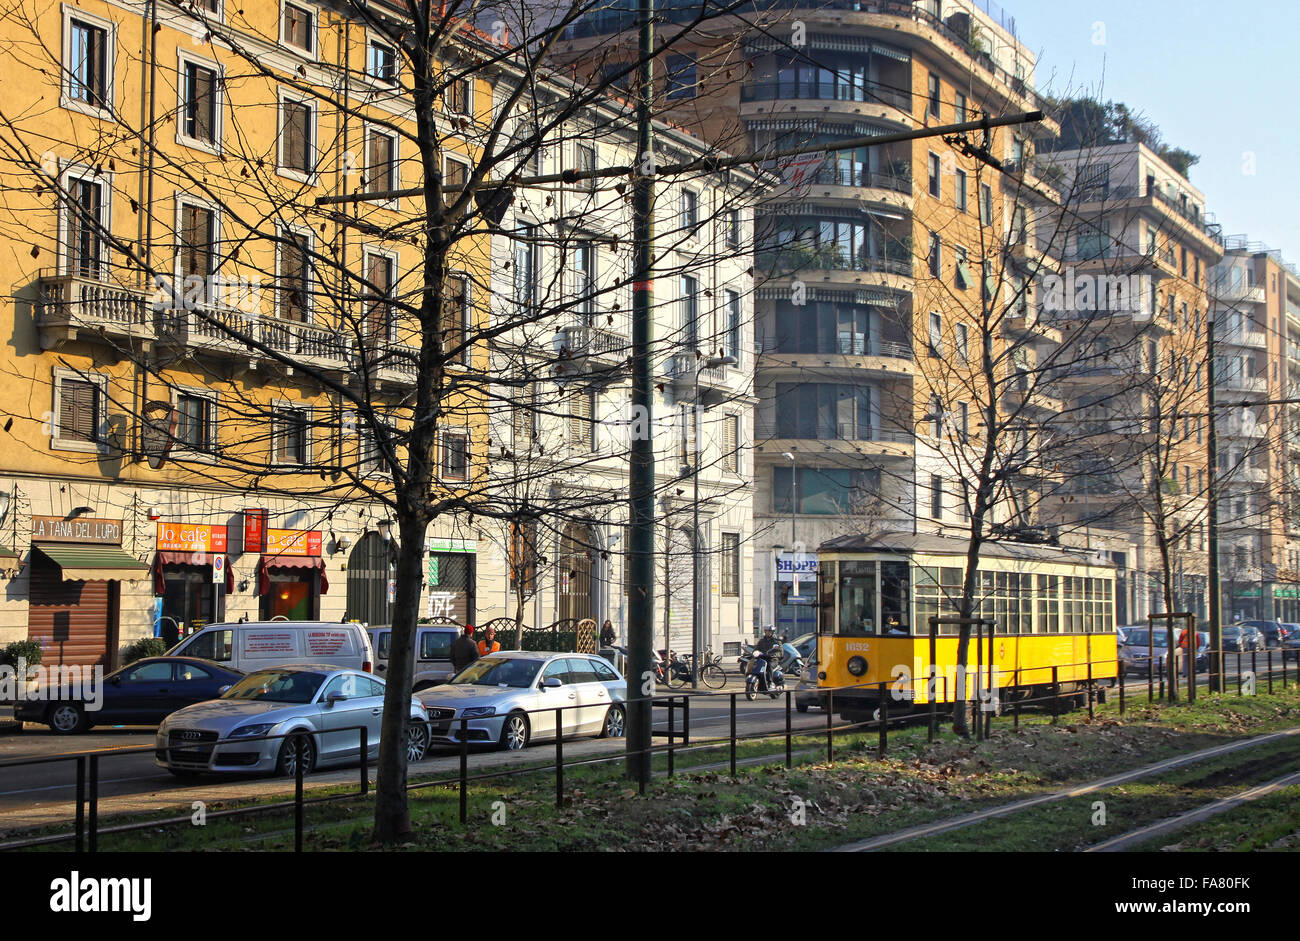 MILAN, ITALY - DECEMBER 31, 2010: Old traditional tram (ATM Class 1500) on the street of Milan. Milan tramway network operation Stock Photo